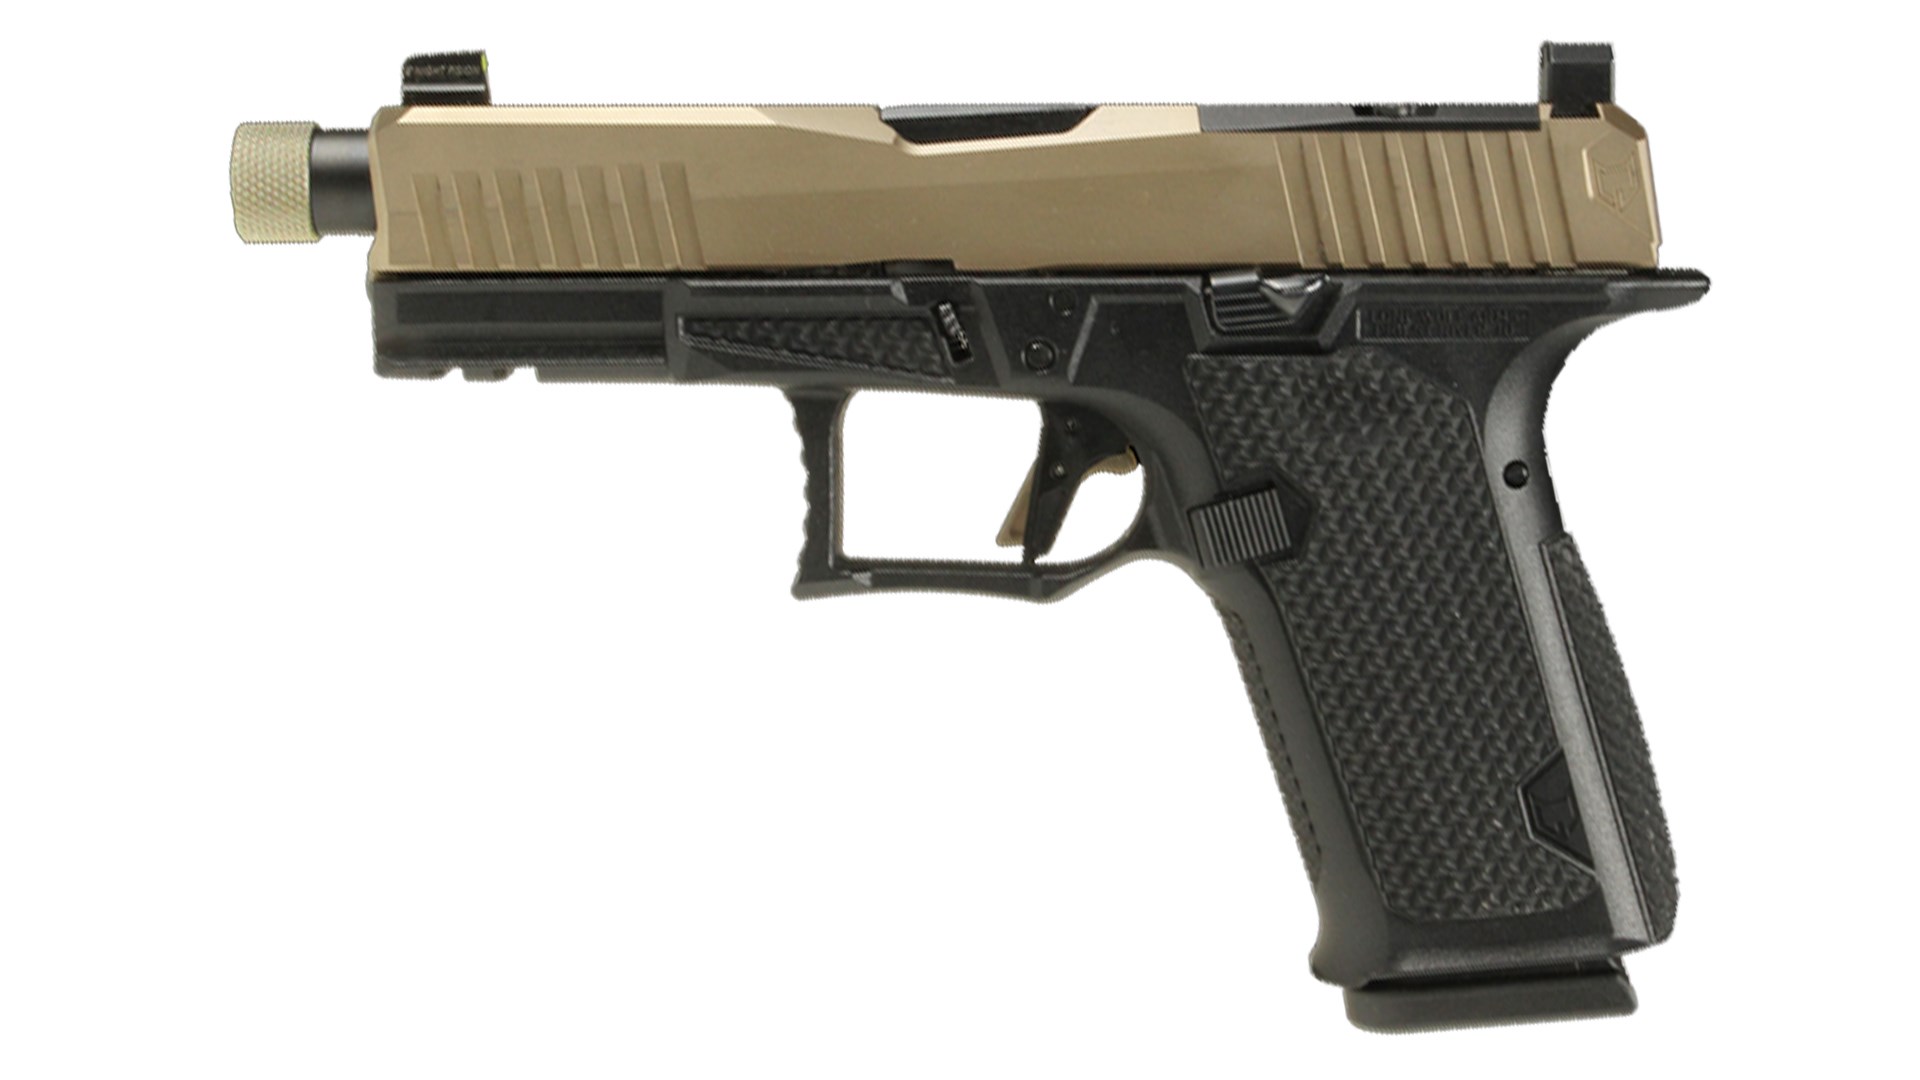 A two-tone version of the Lone Wolf Arms DUSK 19 shown with suppressor-height sights and a threaded barrel.